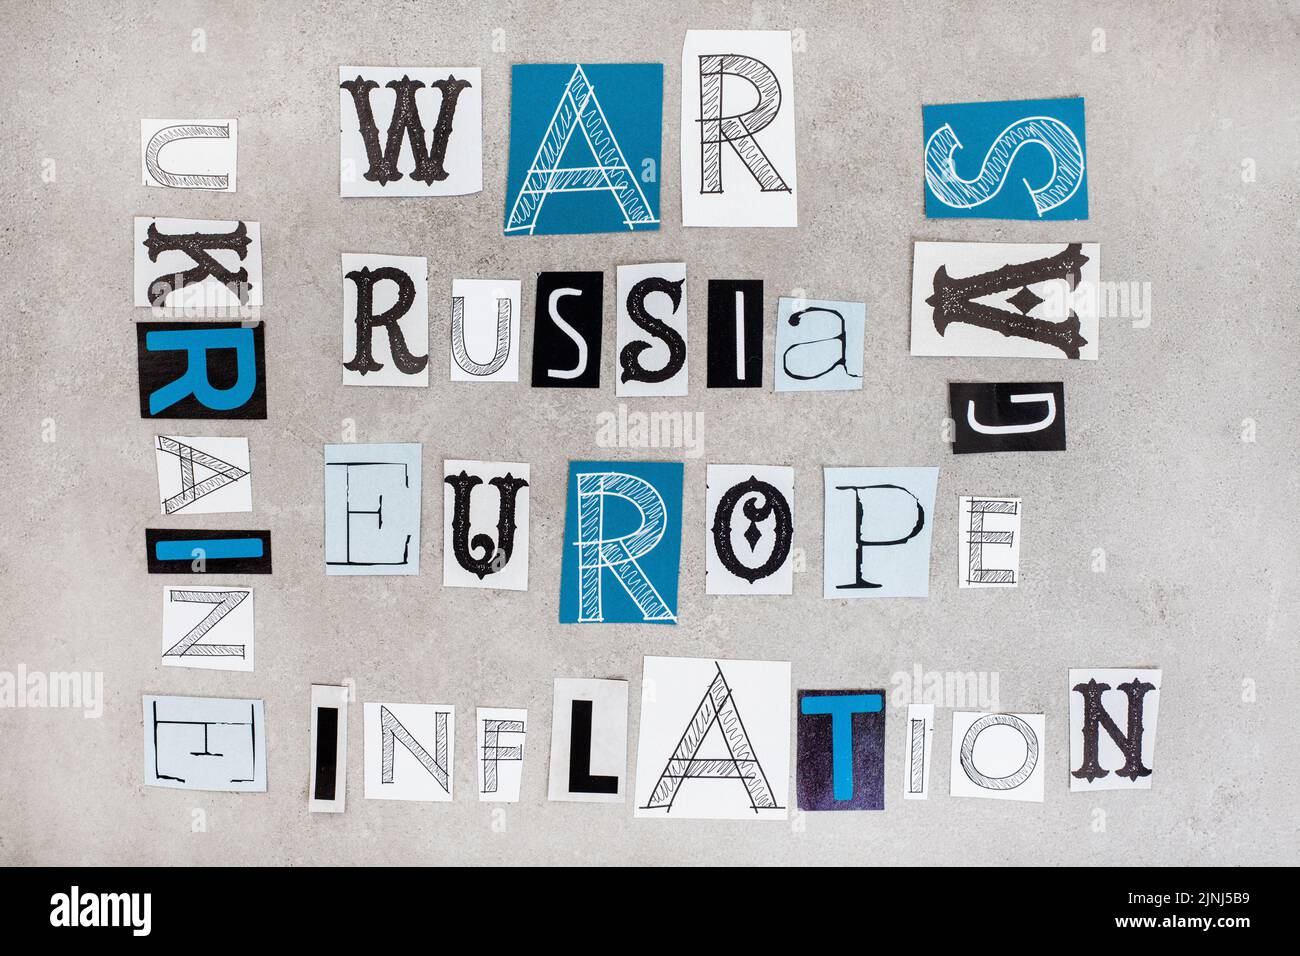 Russia, Ukraine and war, social issues surrounding it in magazine clippings on grey Stock Photo